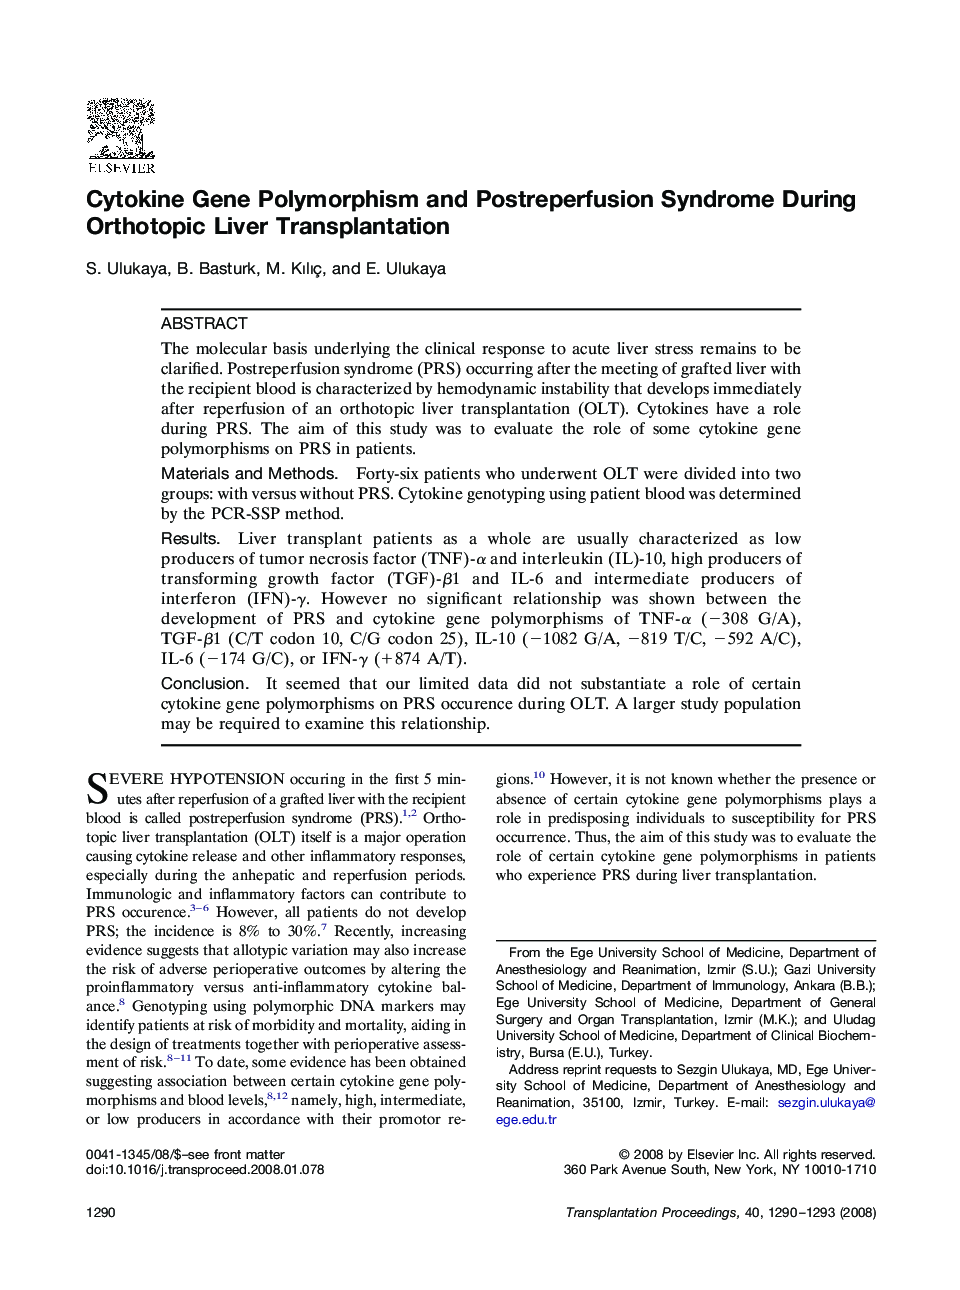 Cytokine Gene Polymorphism and Postreperfusion Syndrome During Orthotopic Liver Transplantation